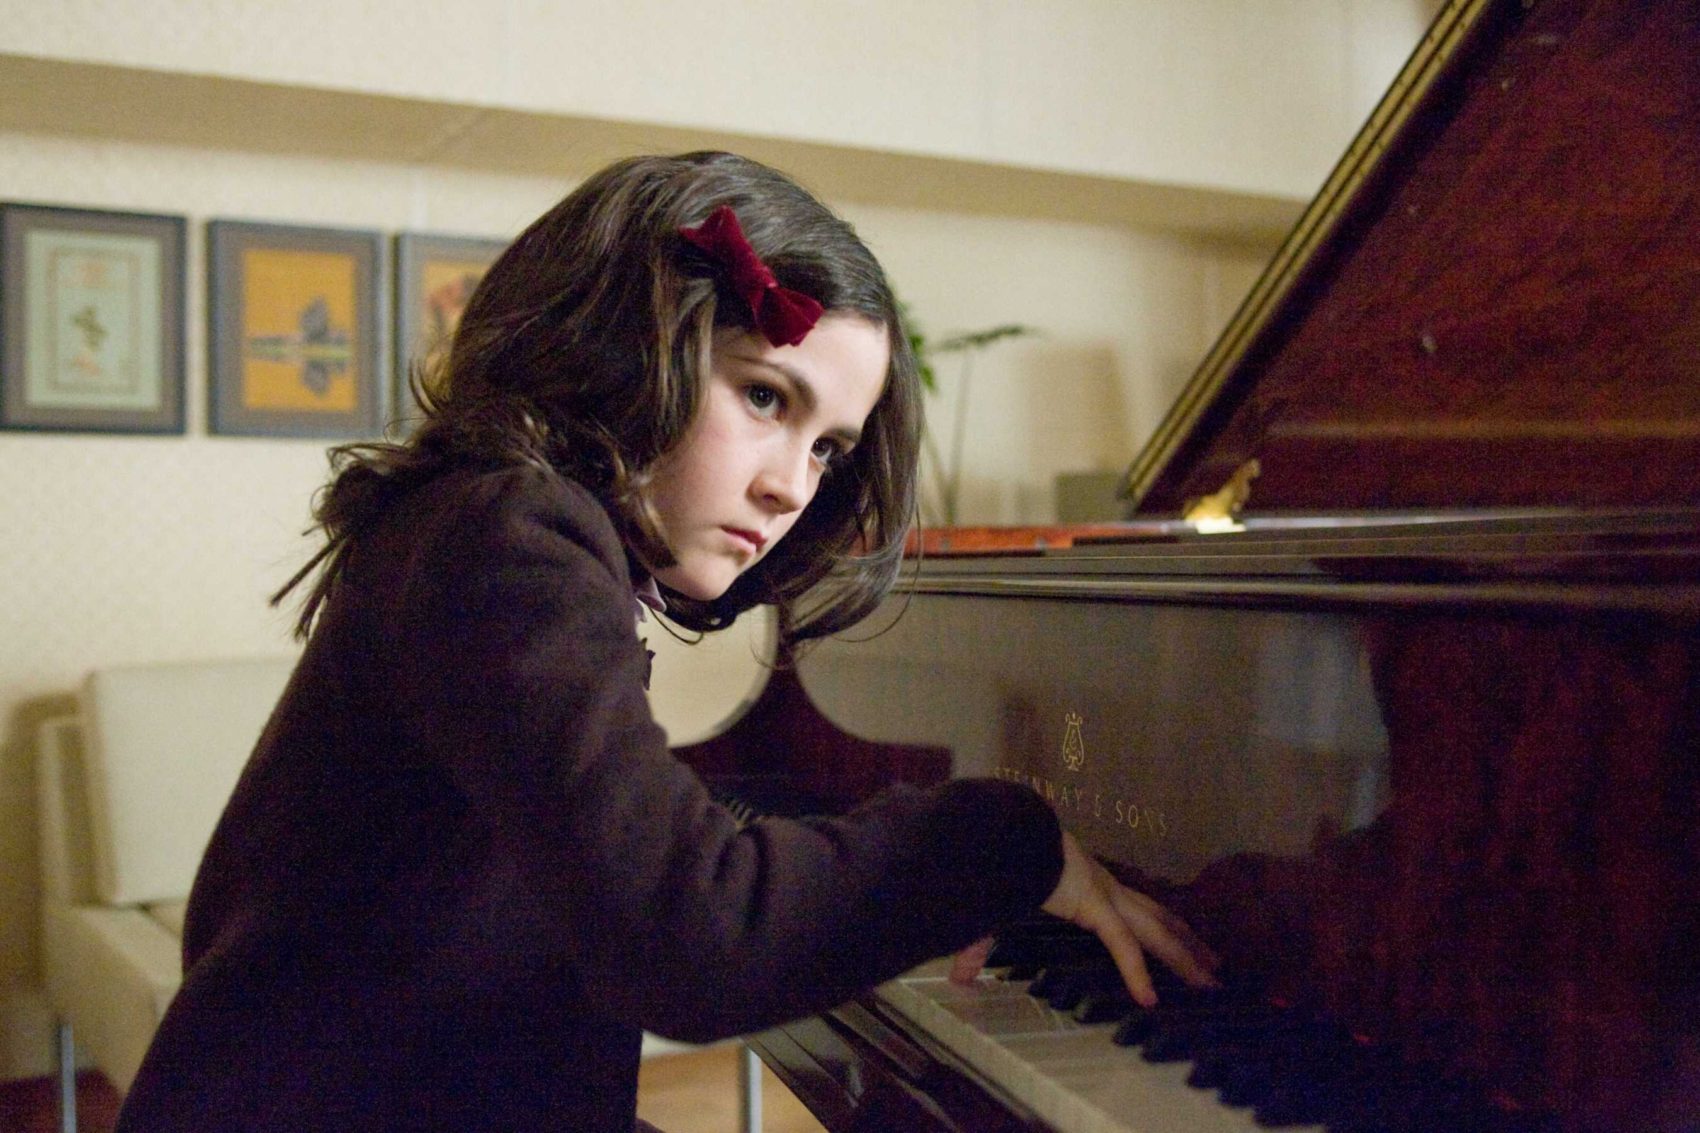 https://bloody-disgusting.com/wp-content/uploads/2012/05/movies_piano_isabelle_fuhrman_orphan_desktop_2700x1800_wallpaper-397853-e1575909657181.jpg